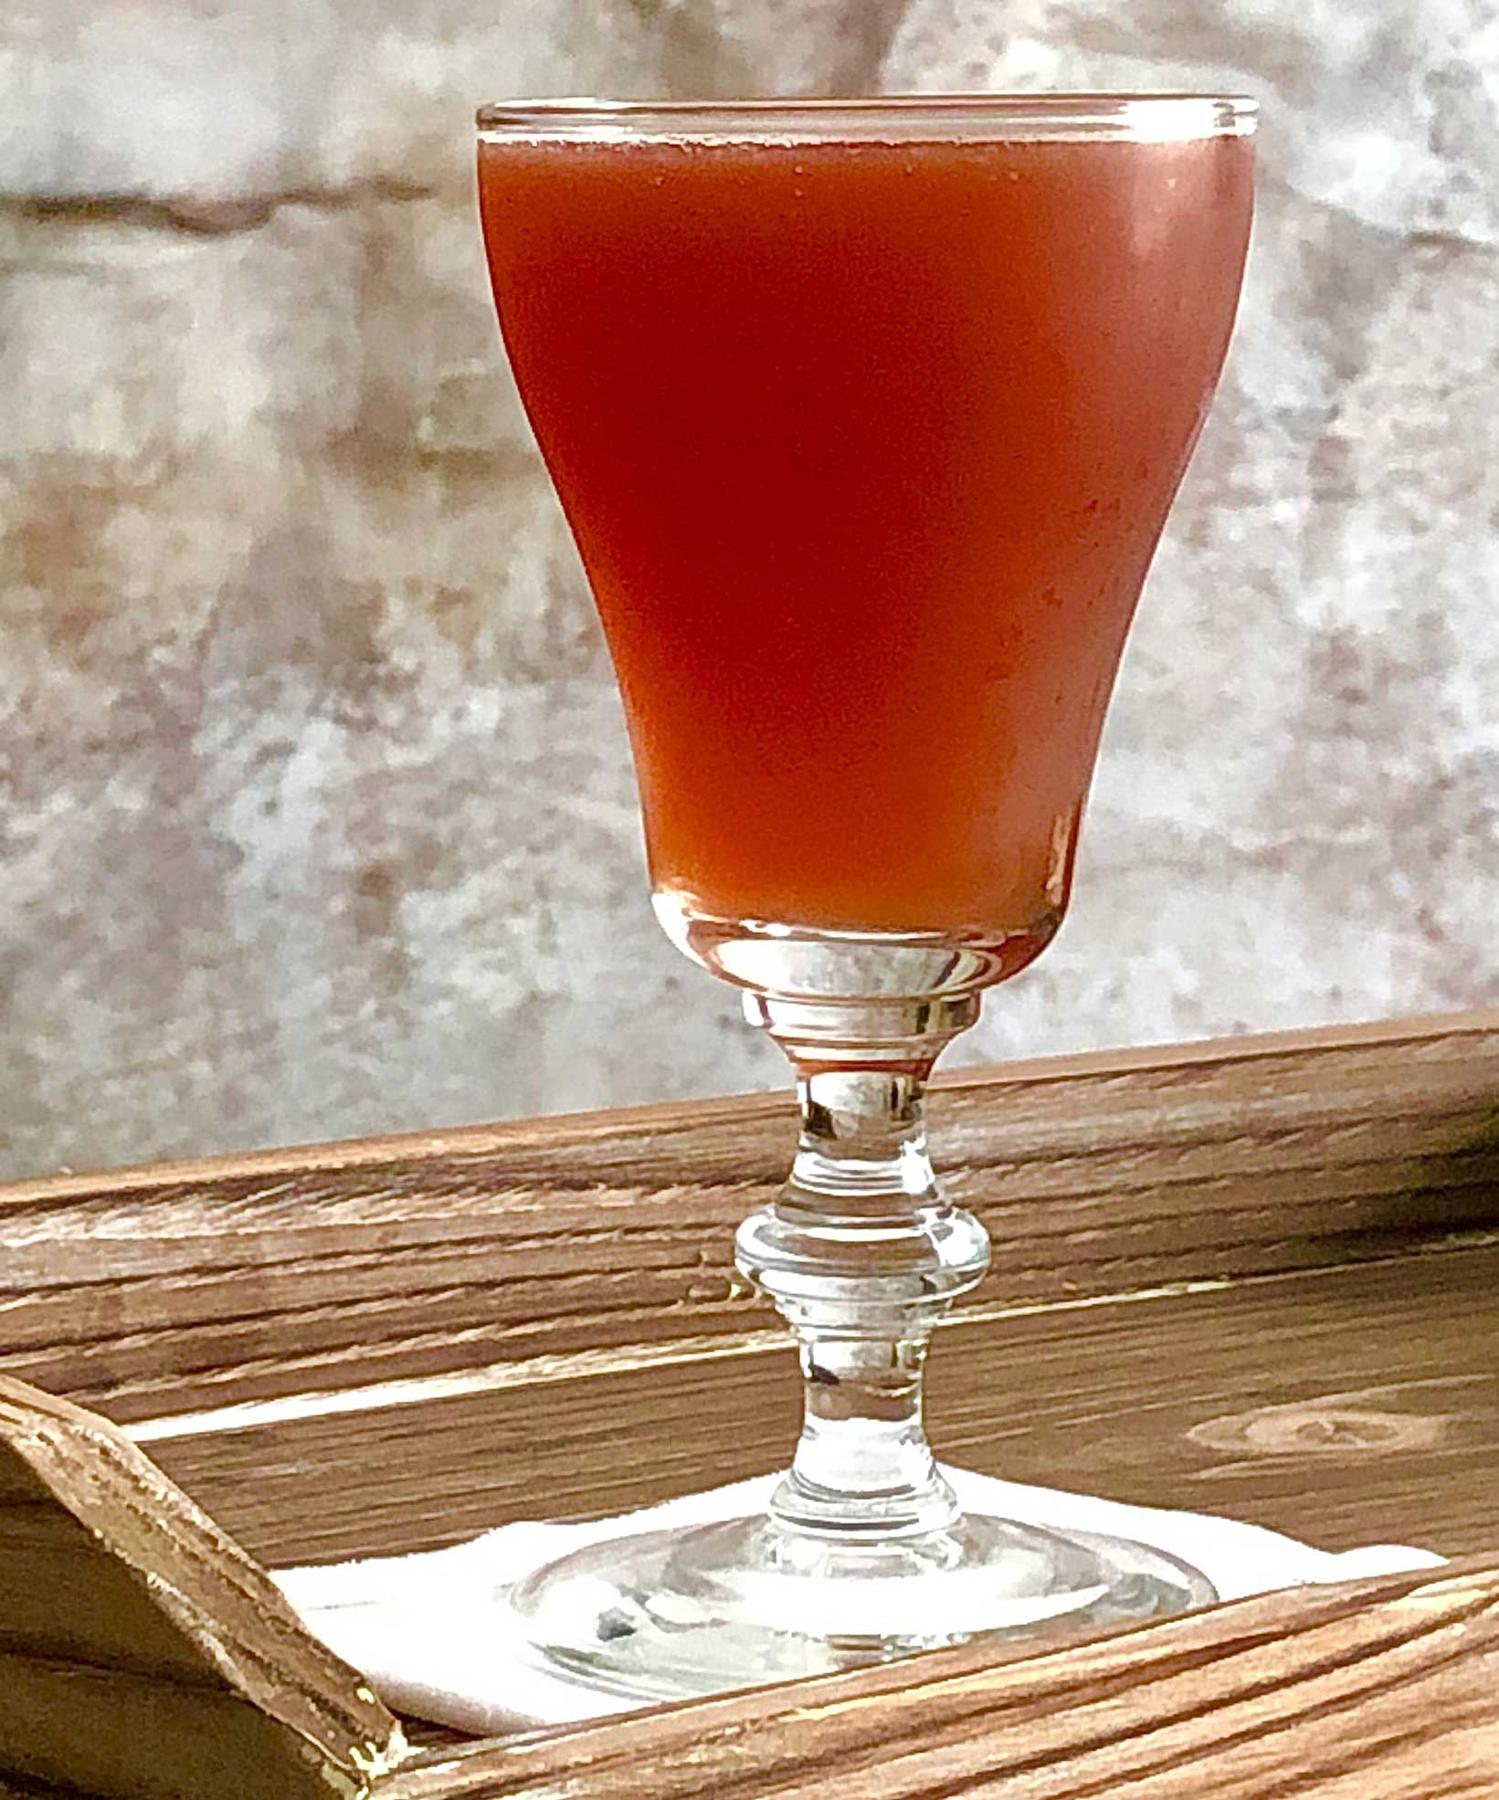 An example of the Plum Billet, the mixed drink (drink), variation on the Pruneaux cocktail, Savoy Cocktail Book, featuring Hayman’s Royal Dock Navy Strength Gin, Matifoc Rancio Sec, orange juice, Byrrh Grand Quinquina, simple syrup, and Angostura bitters; photo by Lee Edwards